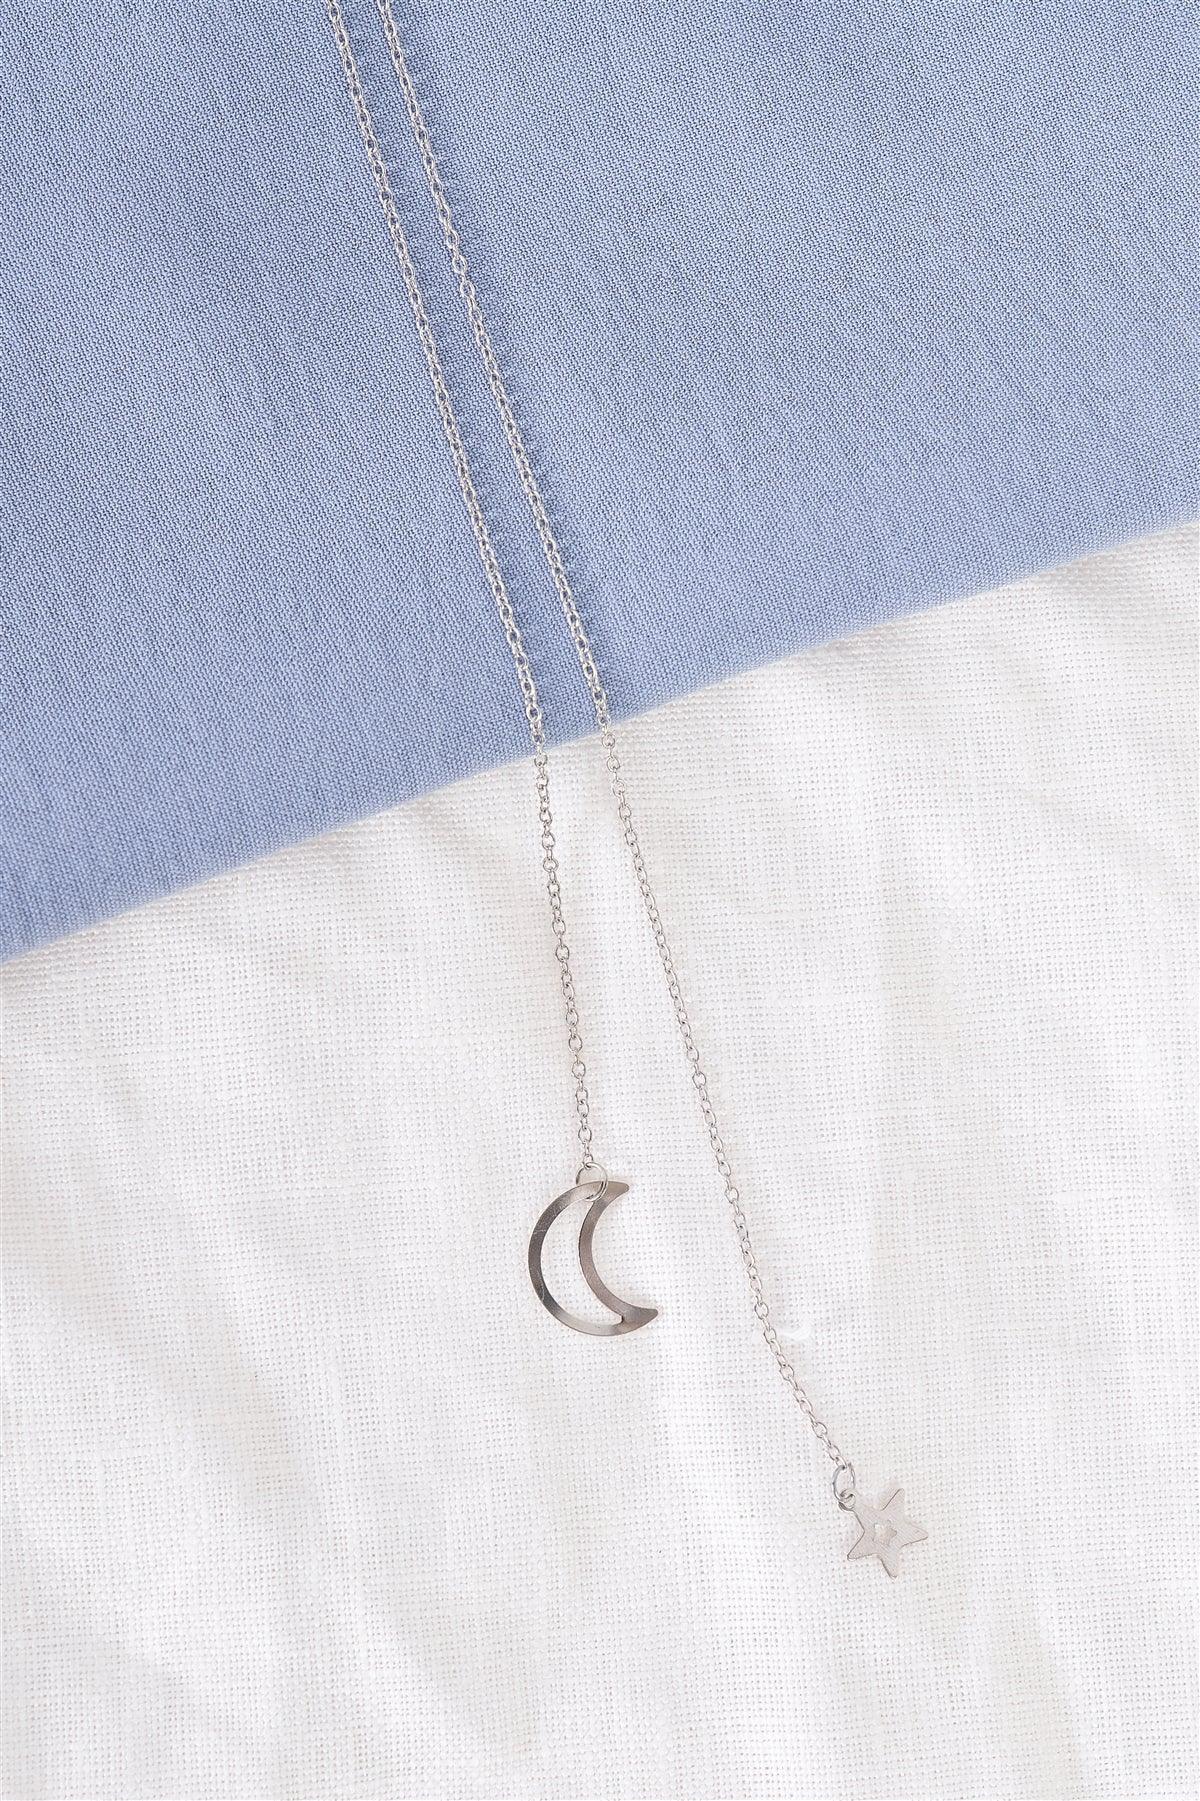 Silver Moon & Star Chain Open Necklace / 3 Pieces